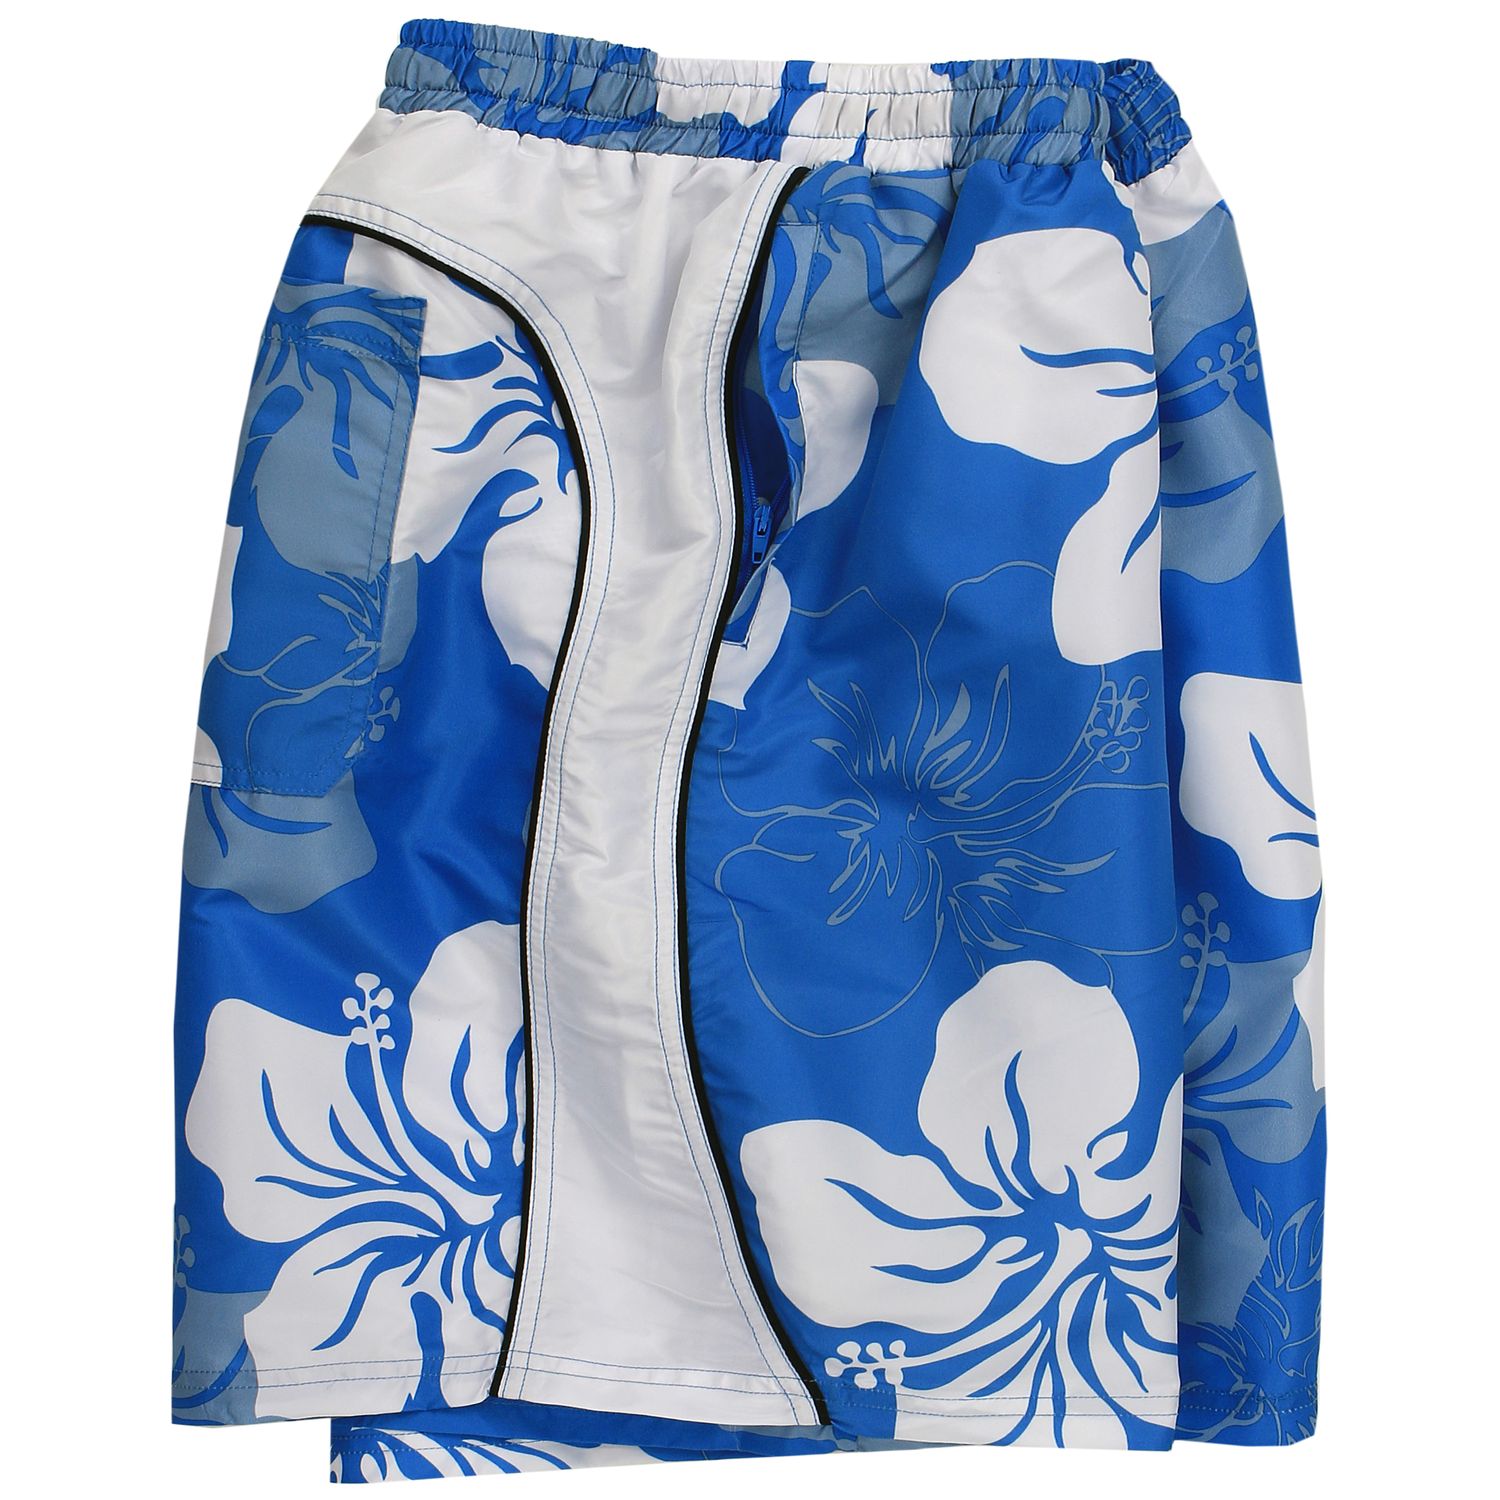 Bathing shorts by Abraxas for men light blue-white patterned in oversizes up to 10XL